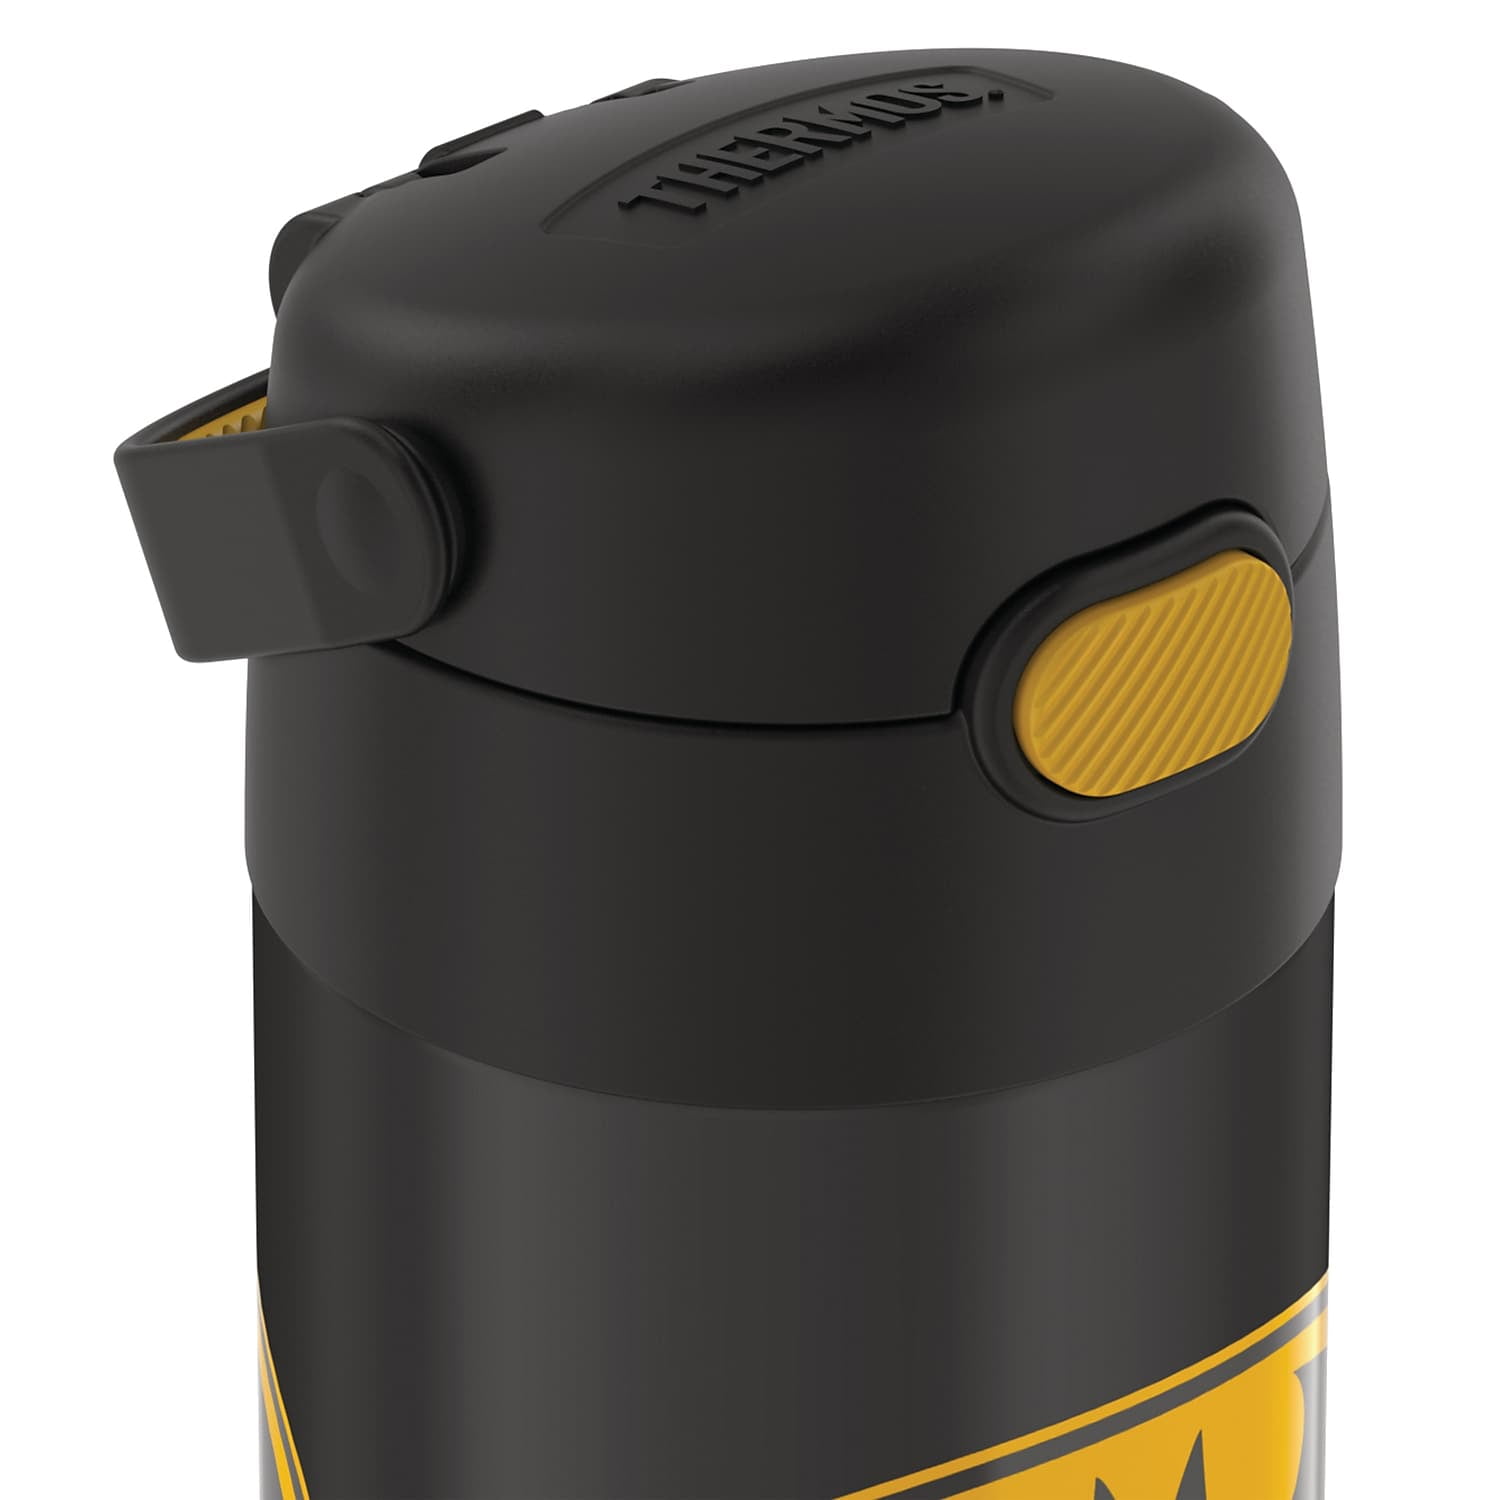 Thermos Batman FUNtainer 12 Ounce Warm Beverage Bottle - Bed Bath & Beyond  - 23059155